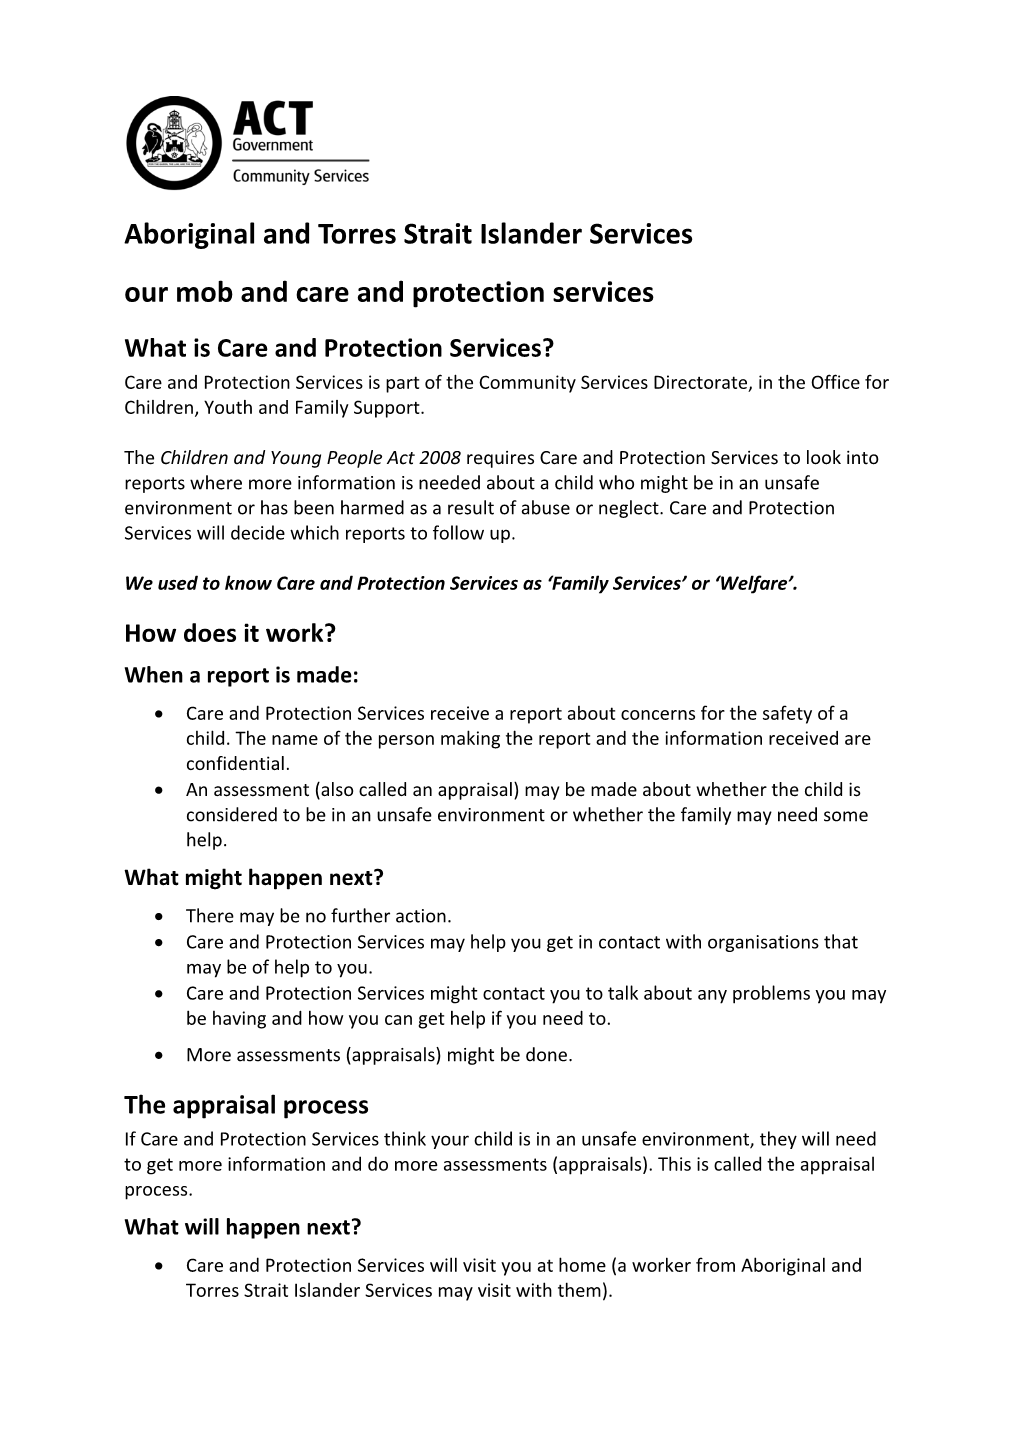 Aboriginal and Torres Strait Islander Services - Our Mob and Care and Protection Services